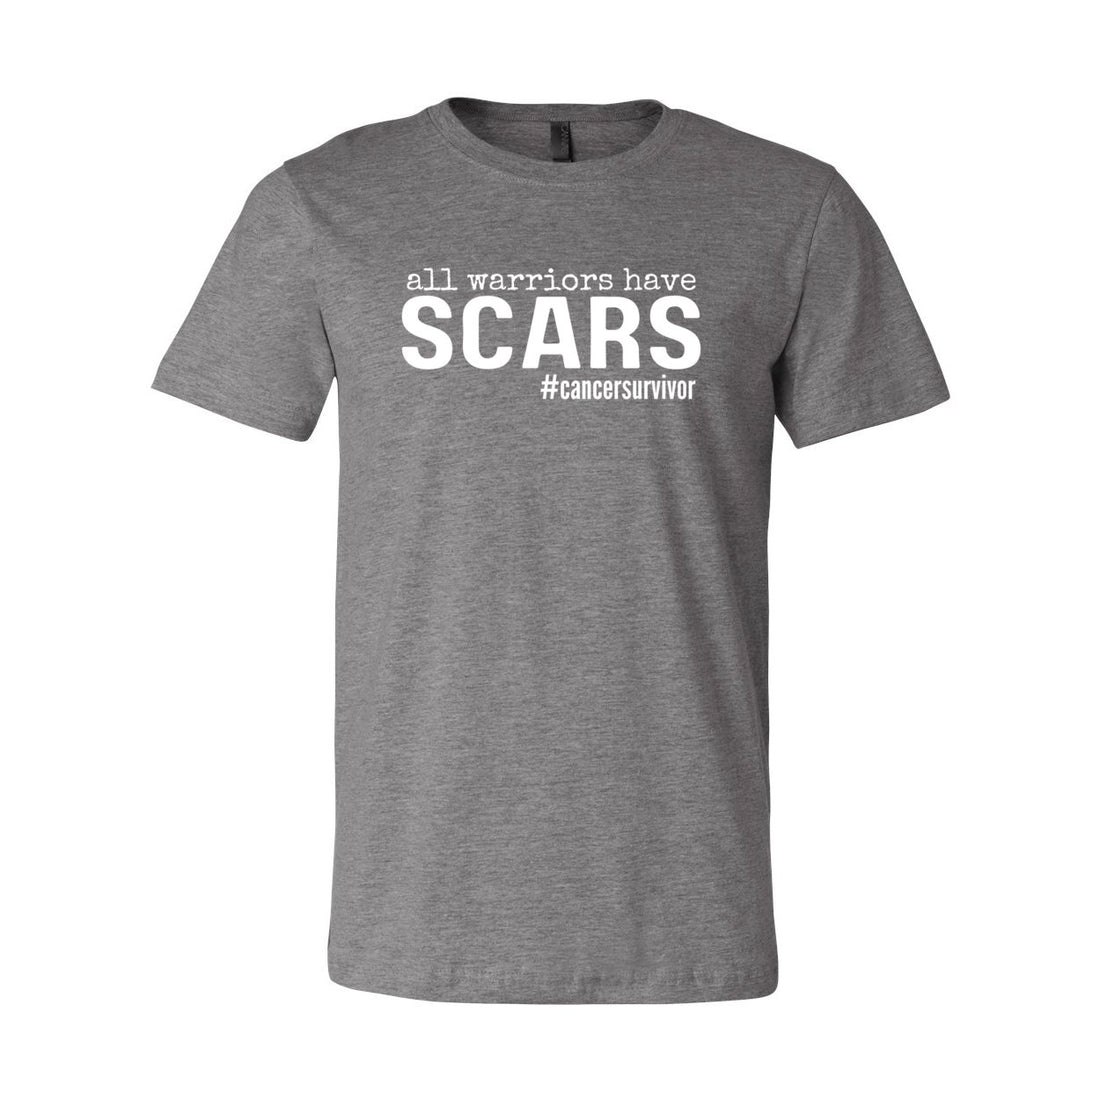 All Warriors Have Scars - T-Shirts - Positively Sassy - All Warriors Have Scars